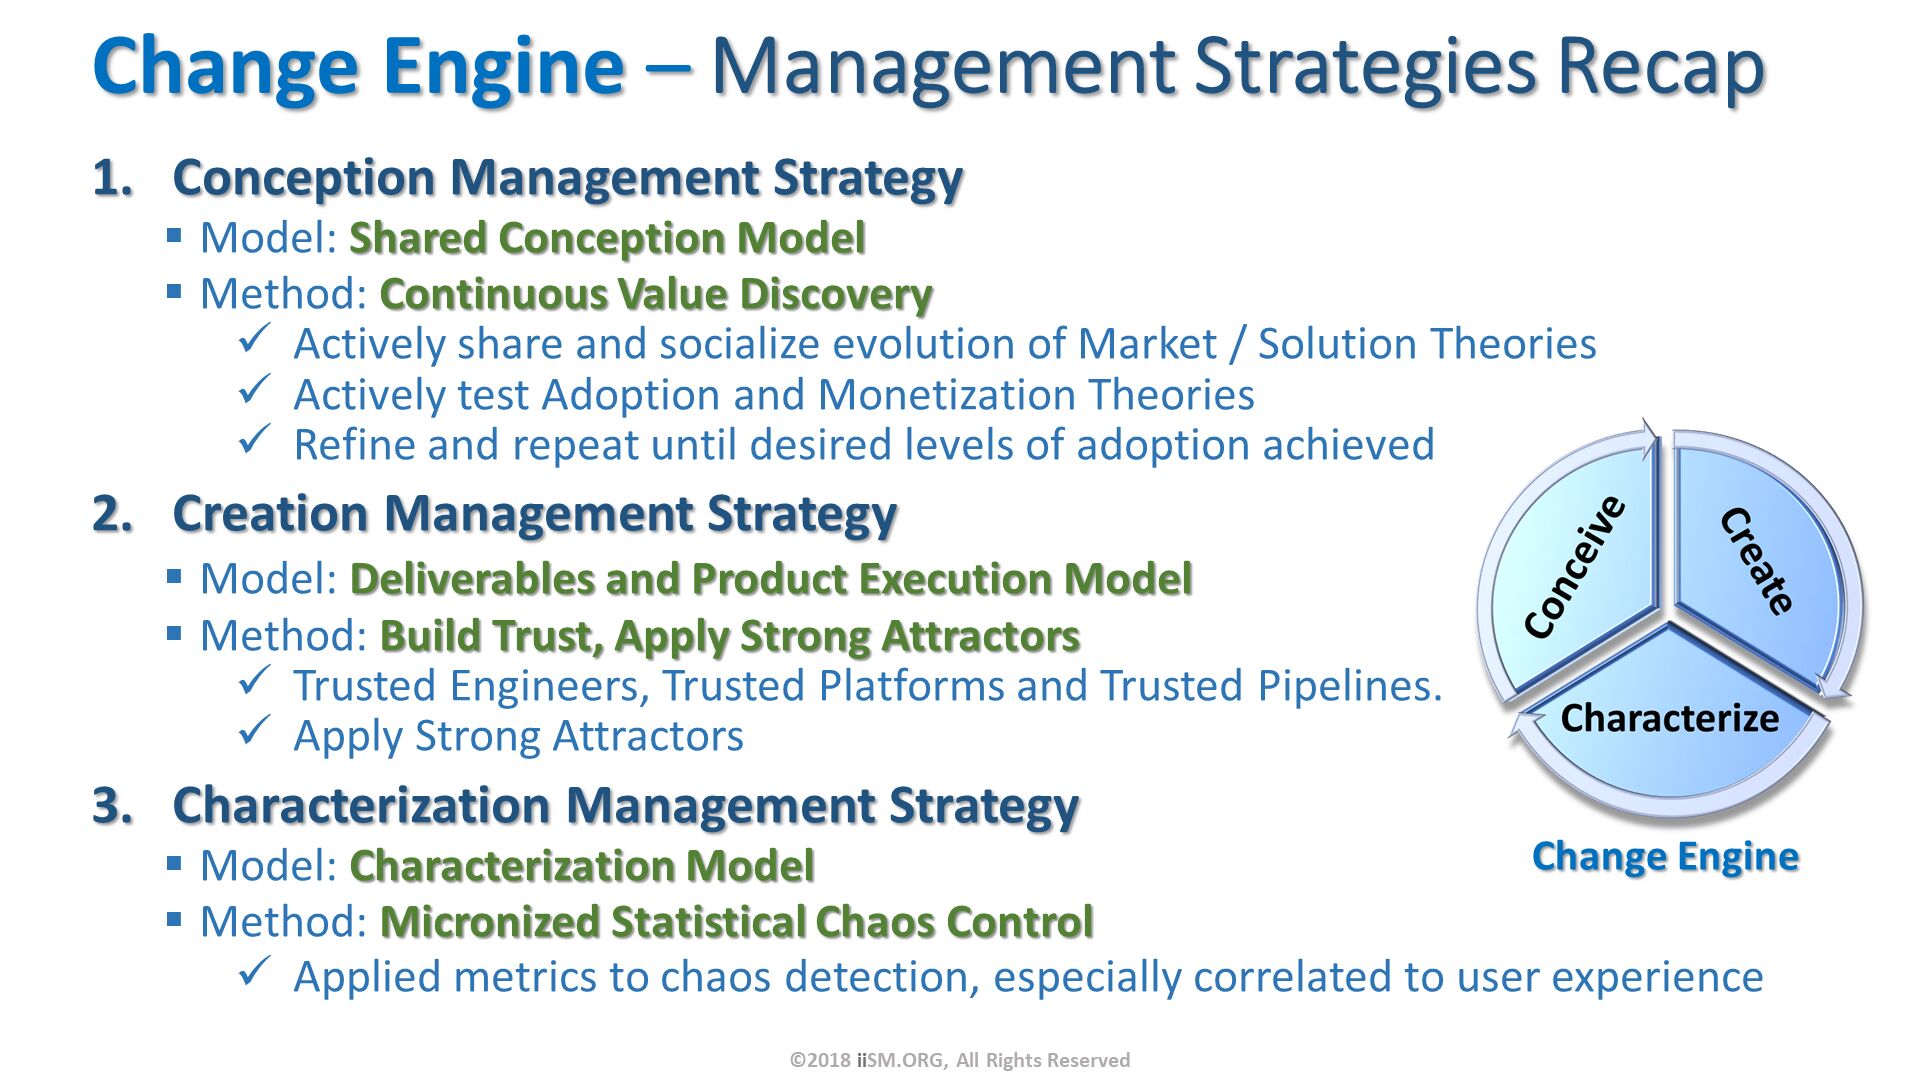 Change Engine – Management Strategies Recap. Conception Management Strategy
Model: Shared Conception Model
Method: Continuous Value Discovery
Actively share and socialize evolution of Market / Solution Theories
Actively test Adoption and Monetization Theories
Refine and repeat until desired levels of adoption achieved
Creation Management Strategy
Model: Deliverables and Product Execution Model
Method: Build Trust, Apply Strong Attractors
Trusted Engineers, Trusted Platforms and Trusted Pipelines.
Apply Strong Attractors
Characterization Management Strategy
Model: Characterization Model
Method: Micronized Statistical Chaos Control
Applied metrics to chaos detection, especially correlated to user experience. ©2018 iiSM.ORG, All Rights Reserved. 